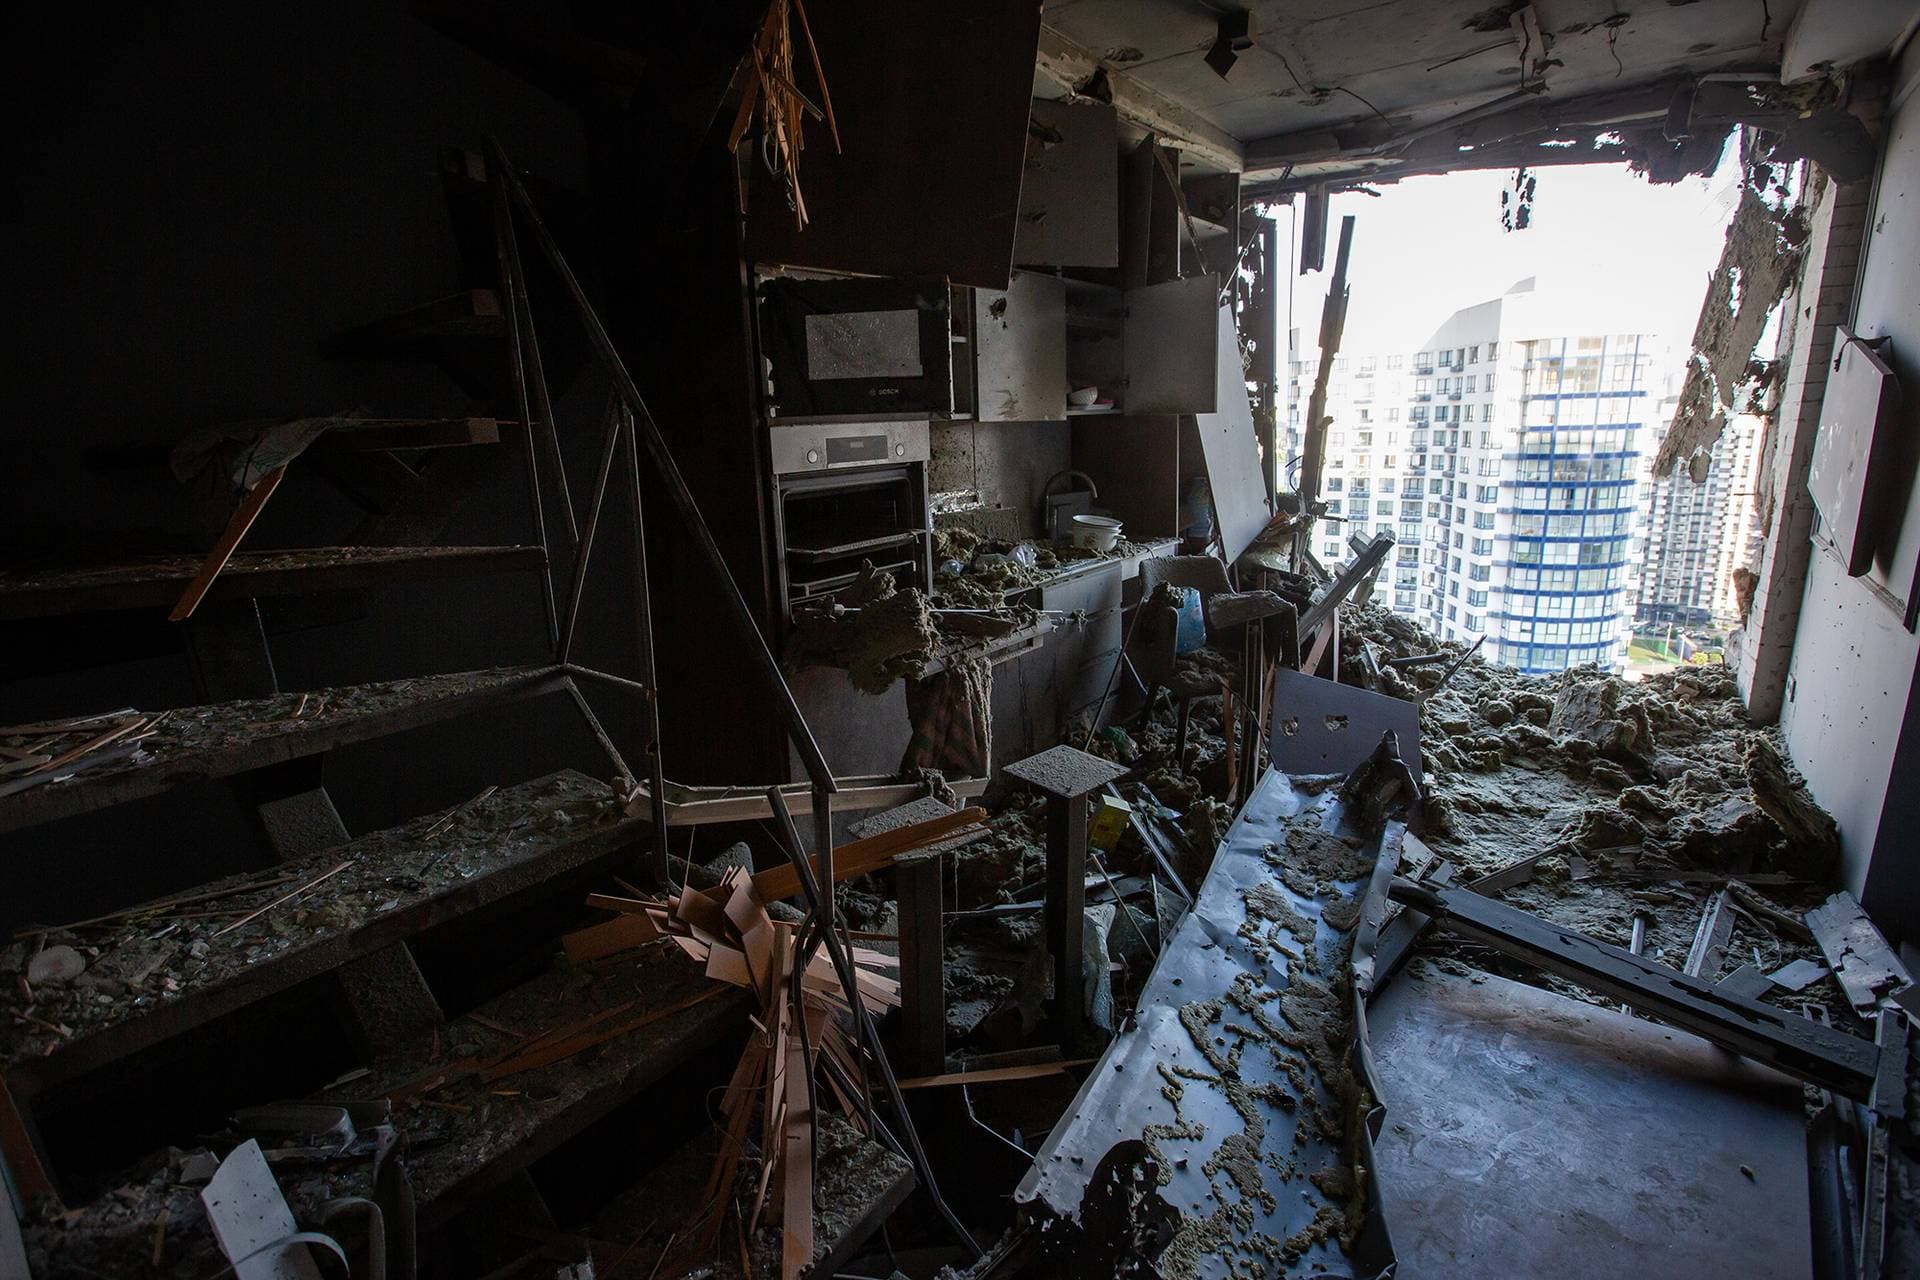 An inside view of the damaged residential building after the drone attack in Kyiv